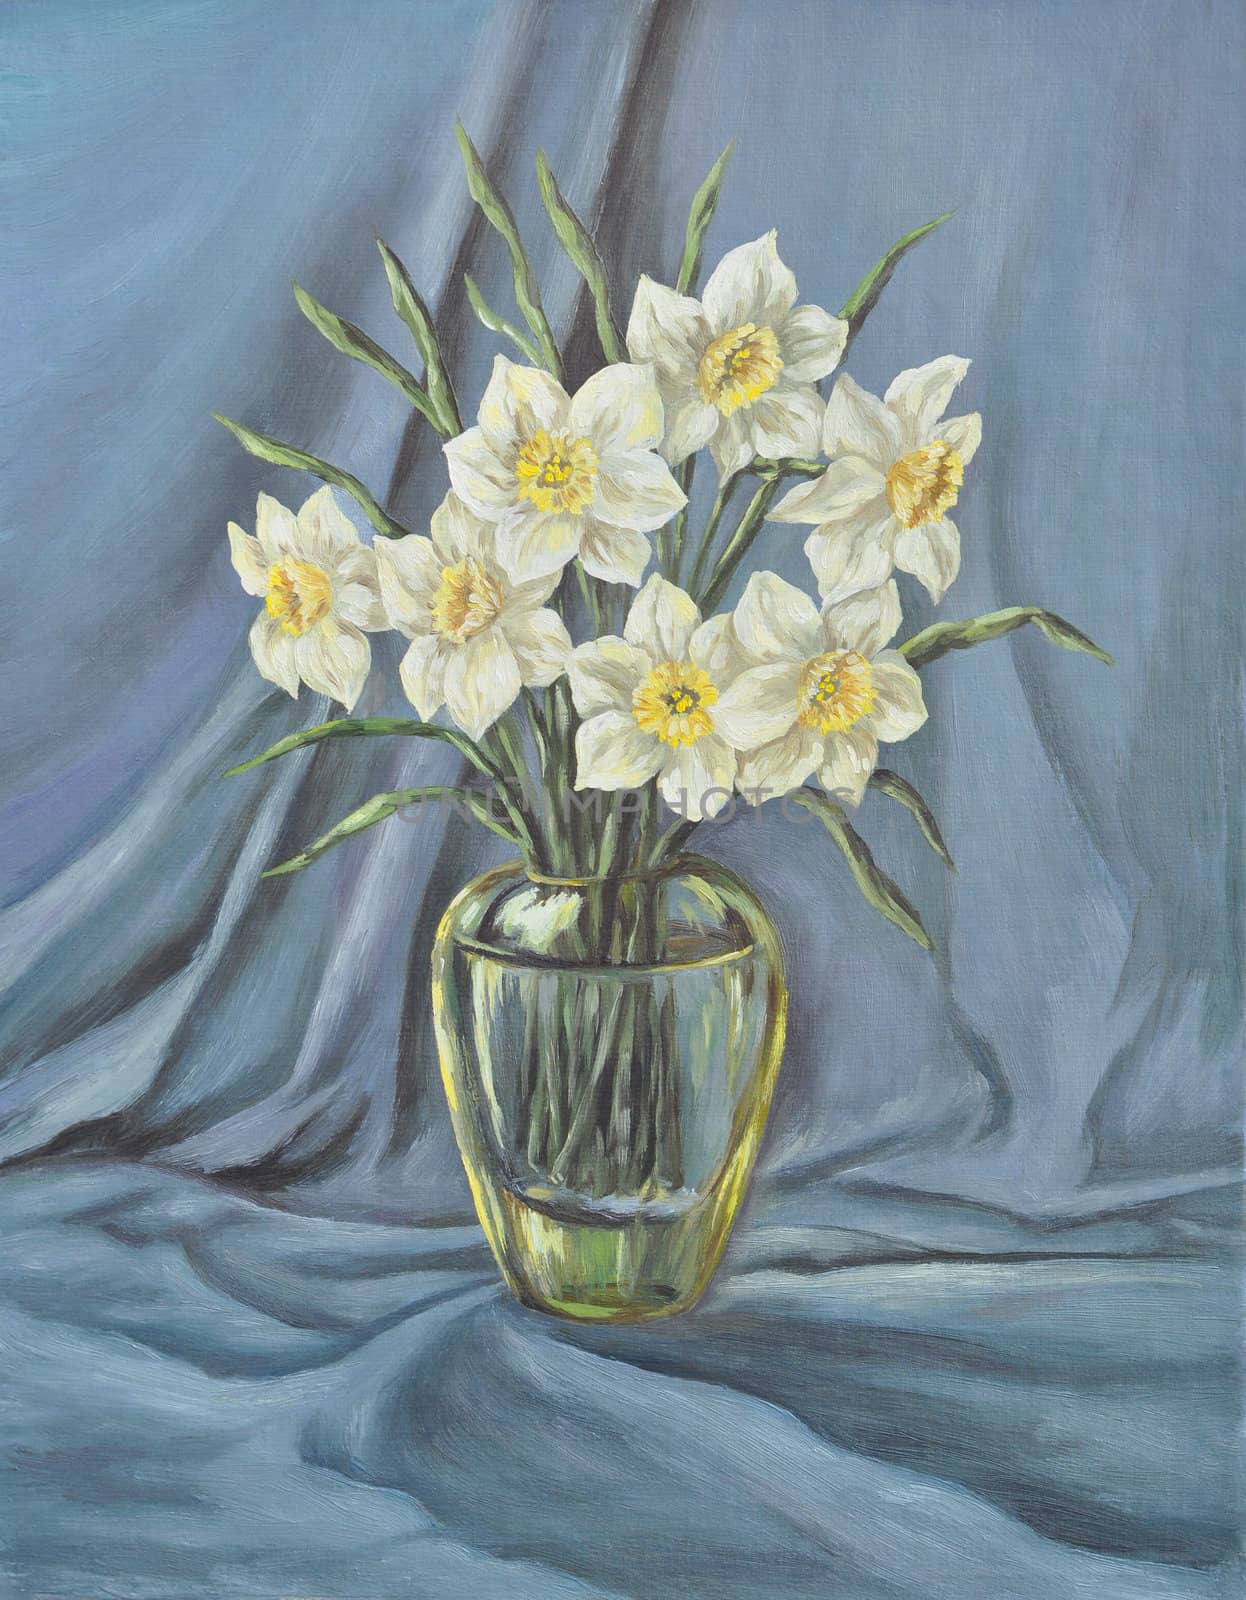 Picture oil paints on a canvas: glass vase with narcissus